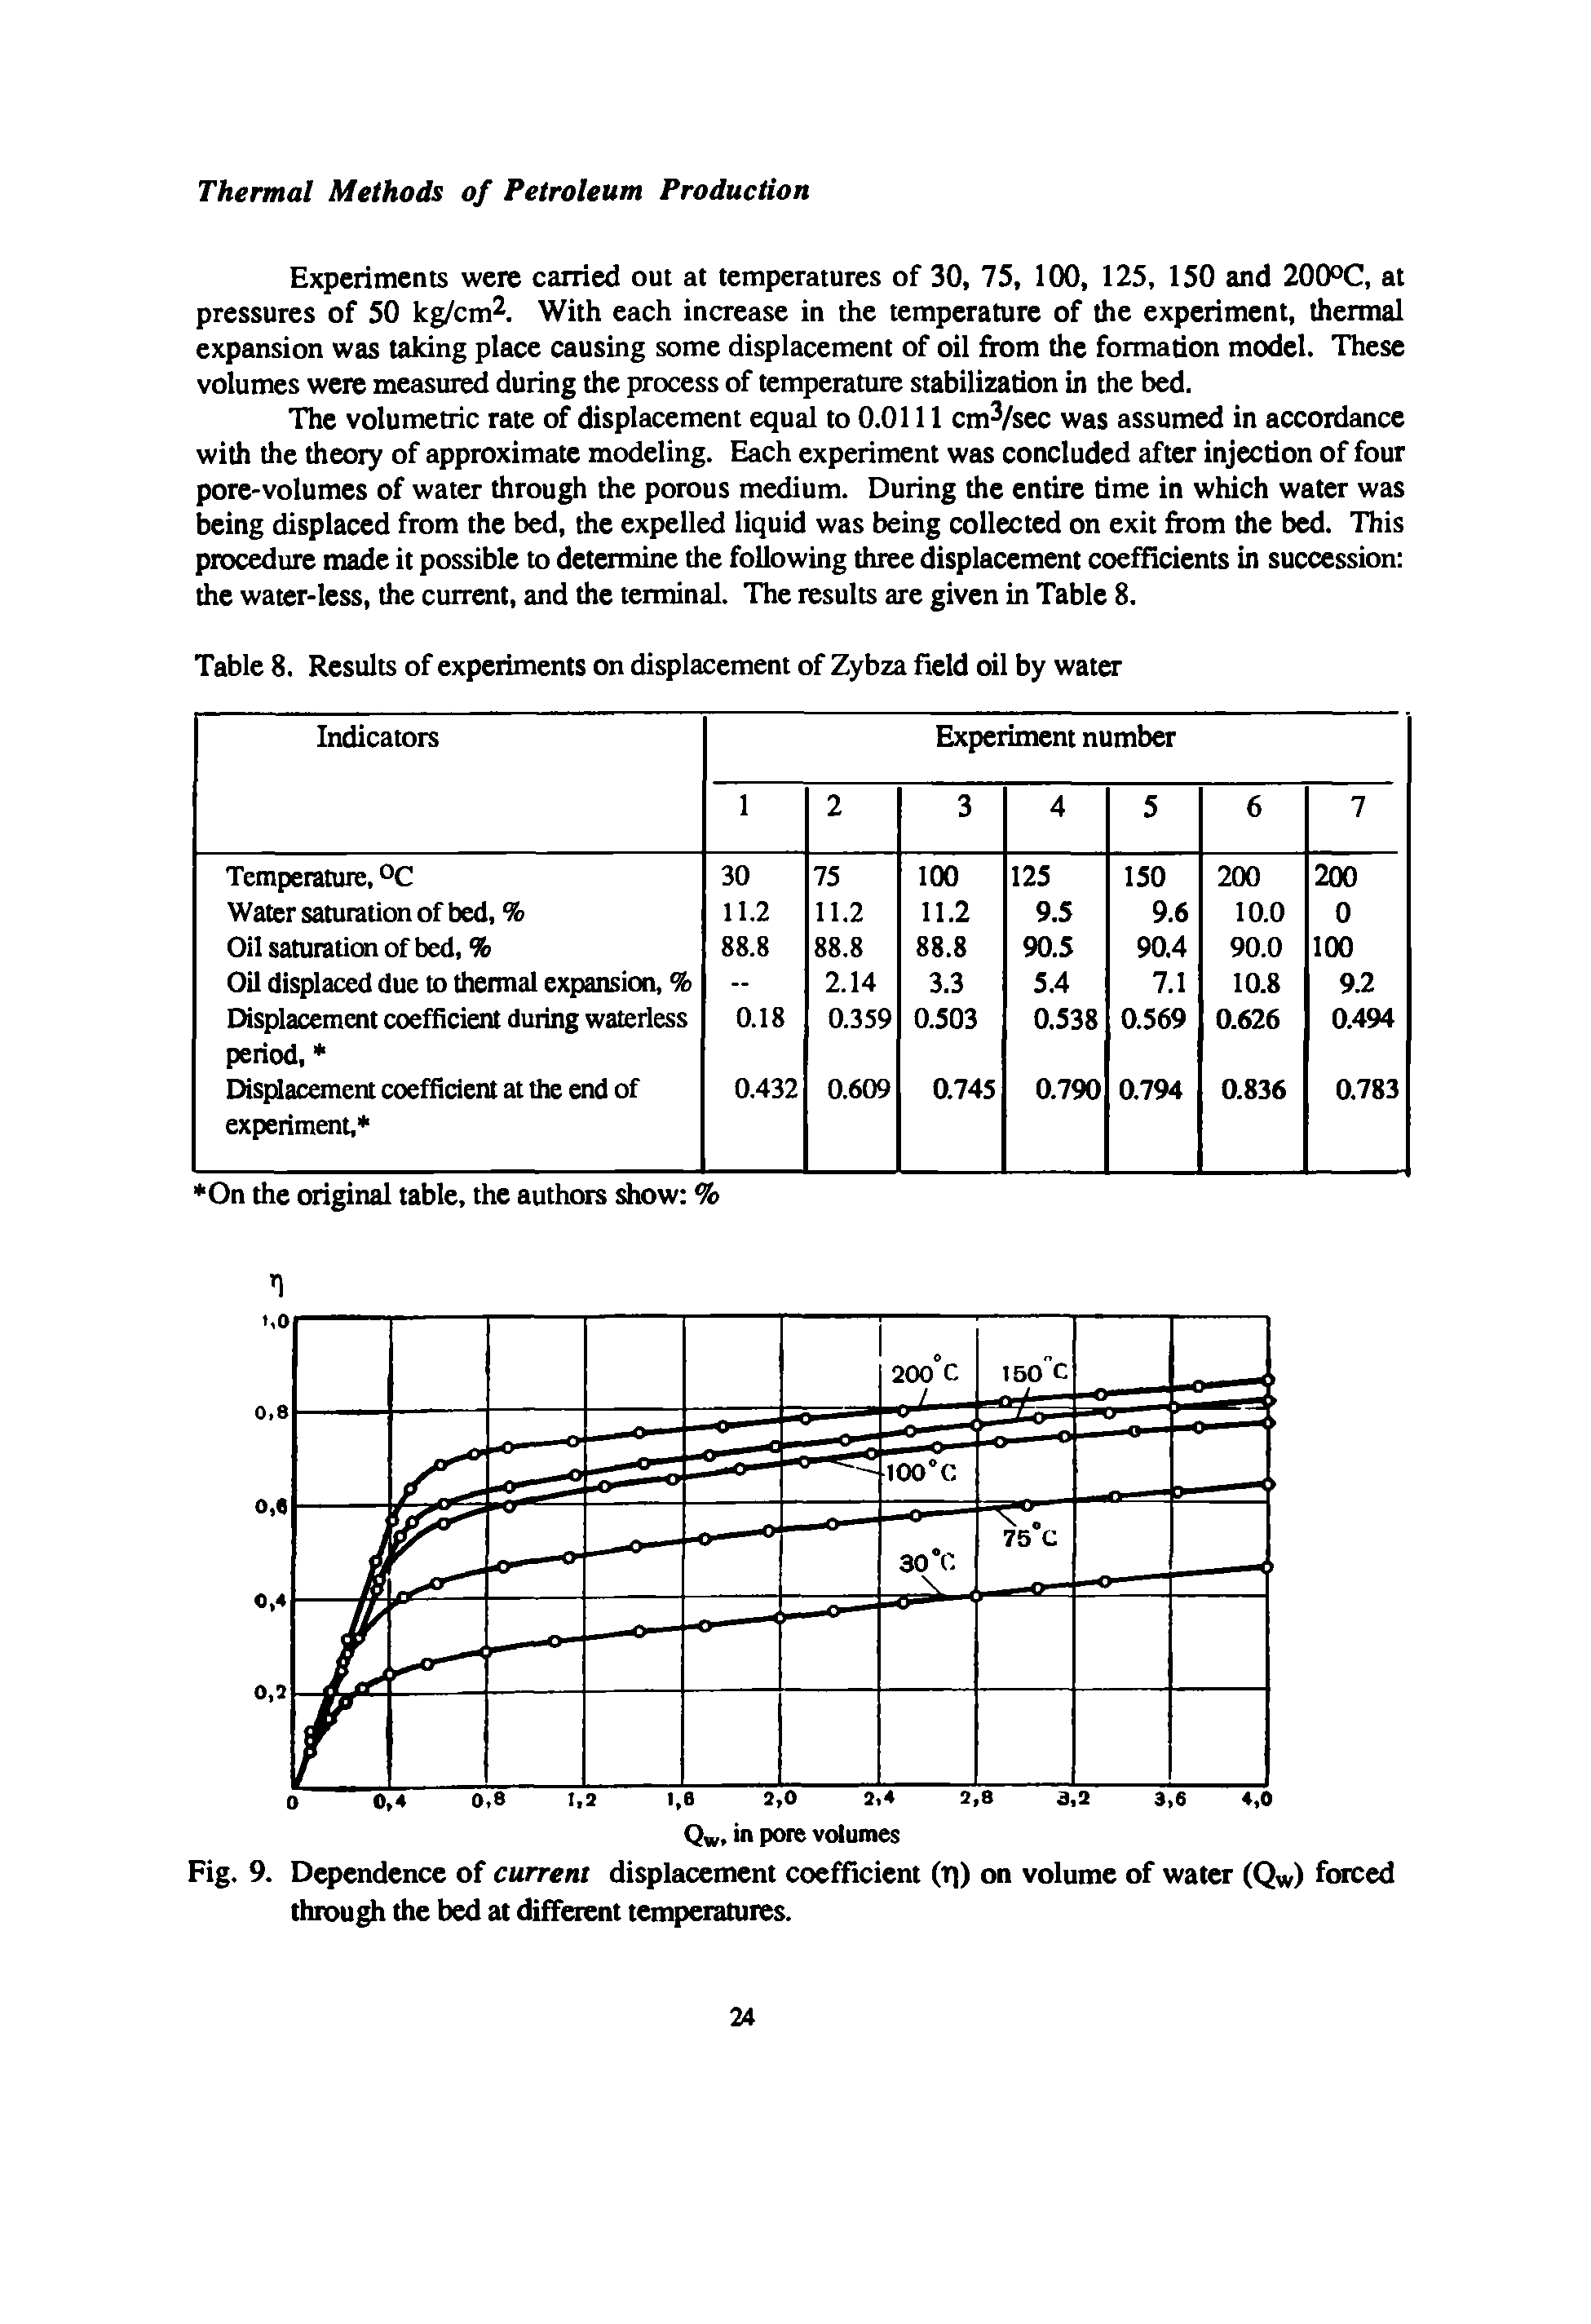 Fig. 9. Dependence of current displacement coefficient (T ) on volume of water (Qw) forced through the bed at different temperatures.